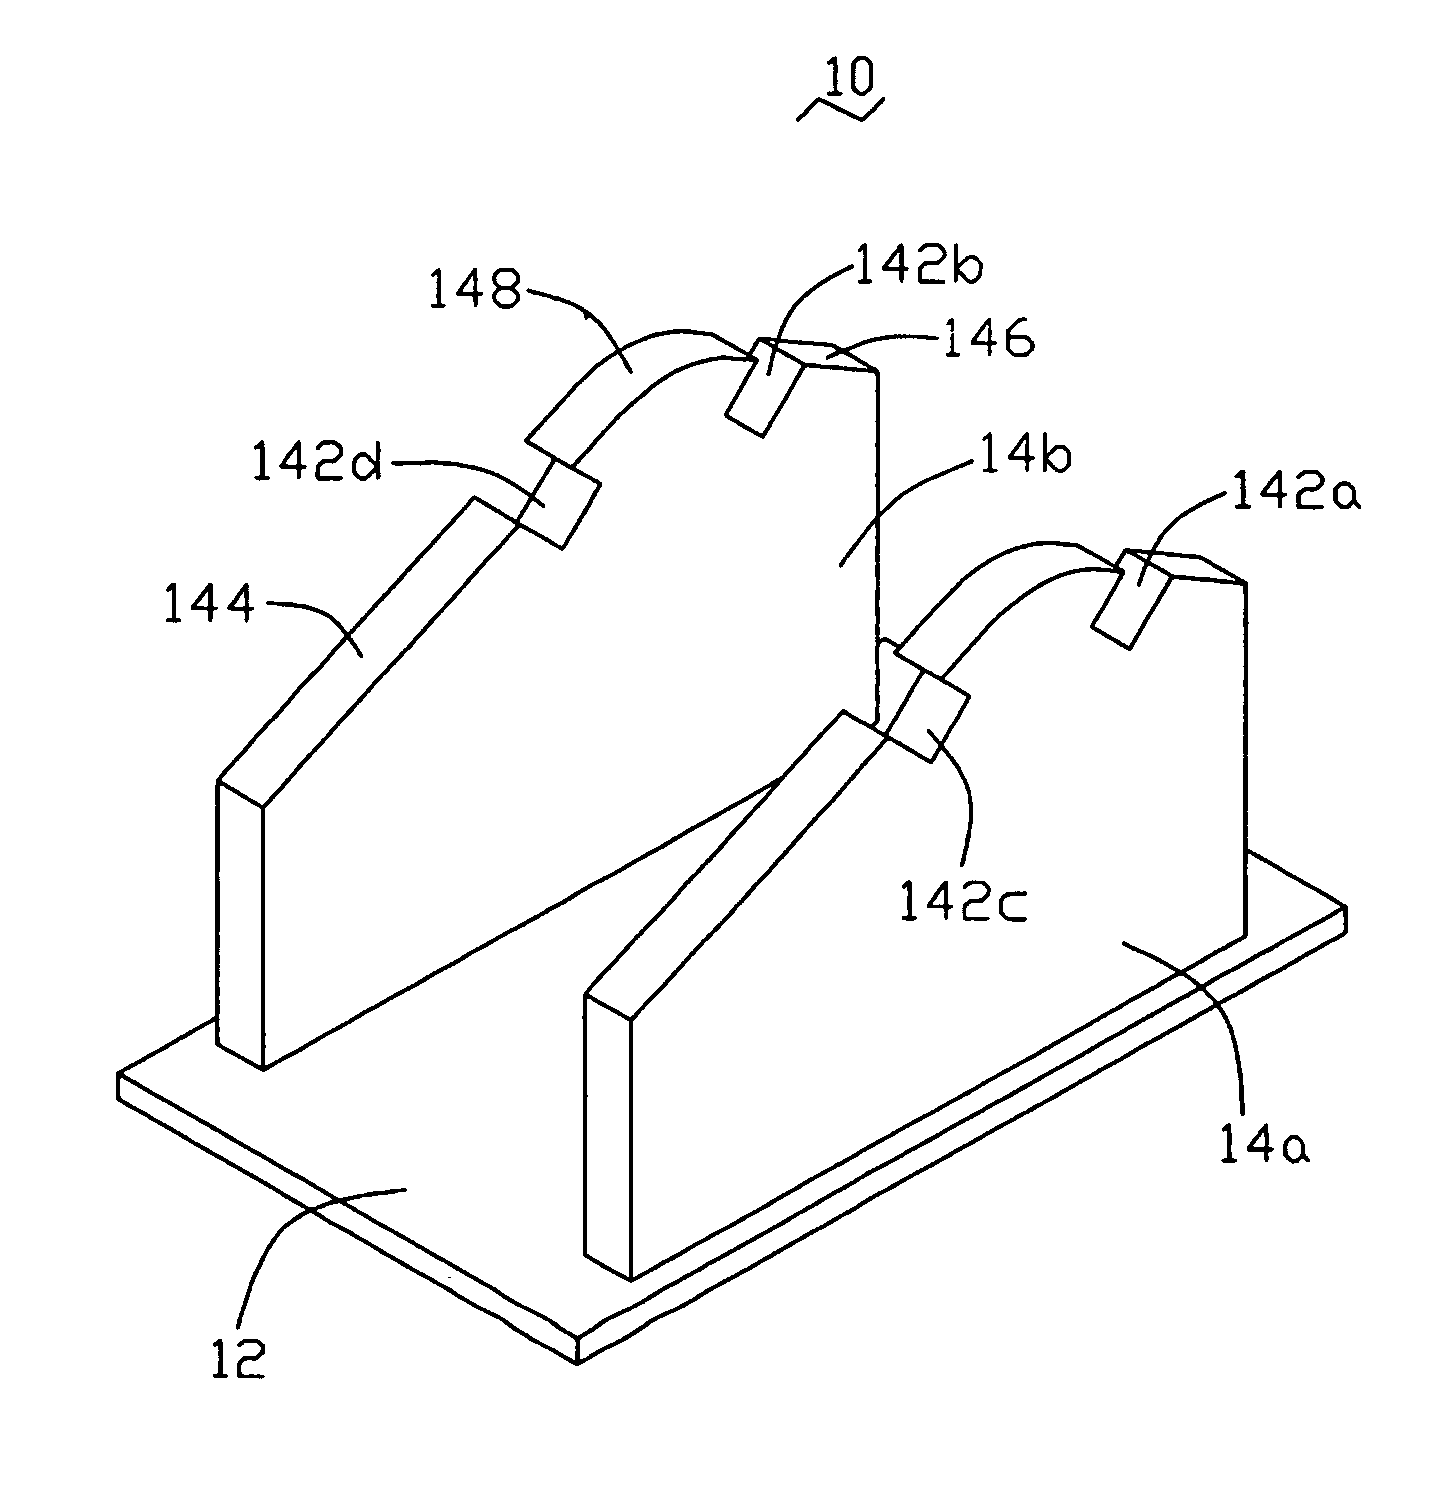 Apparatus for a wire wrapping process